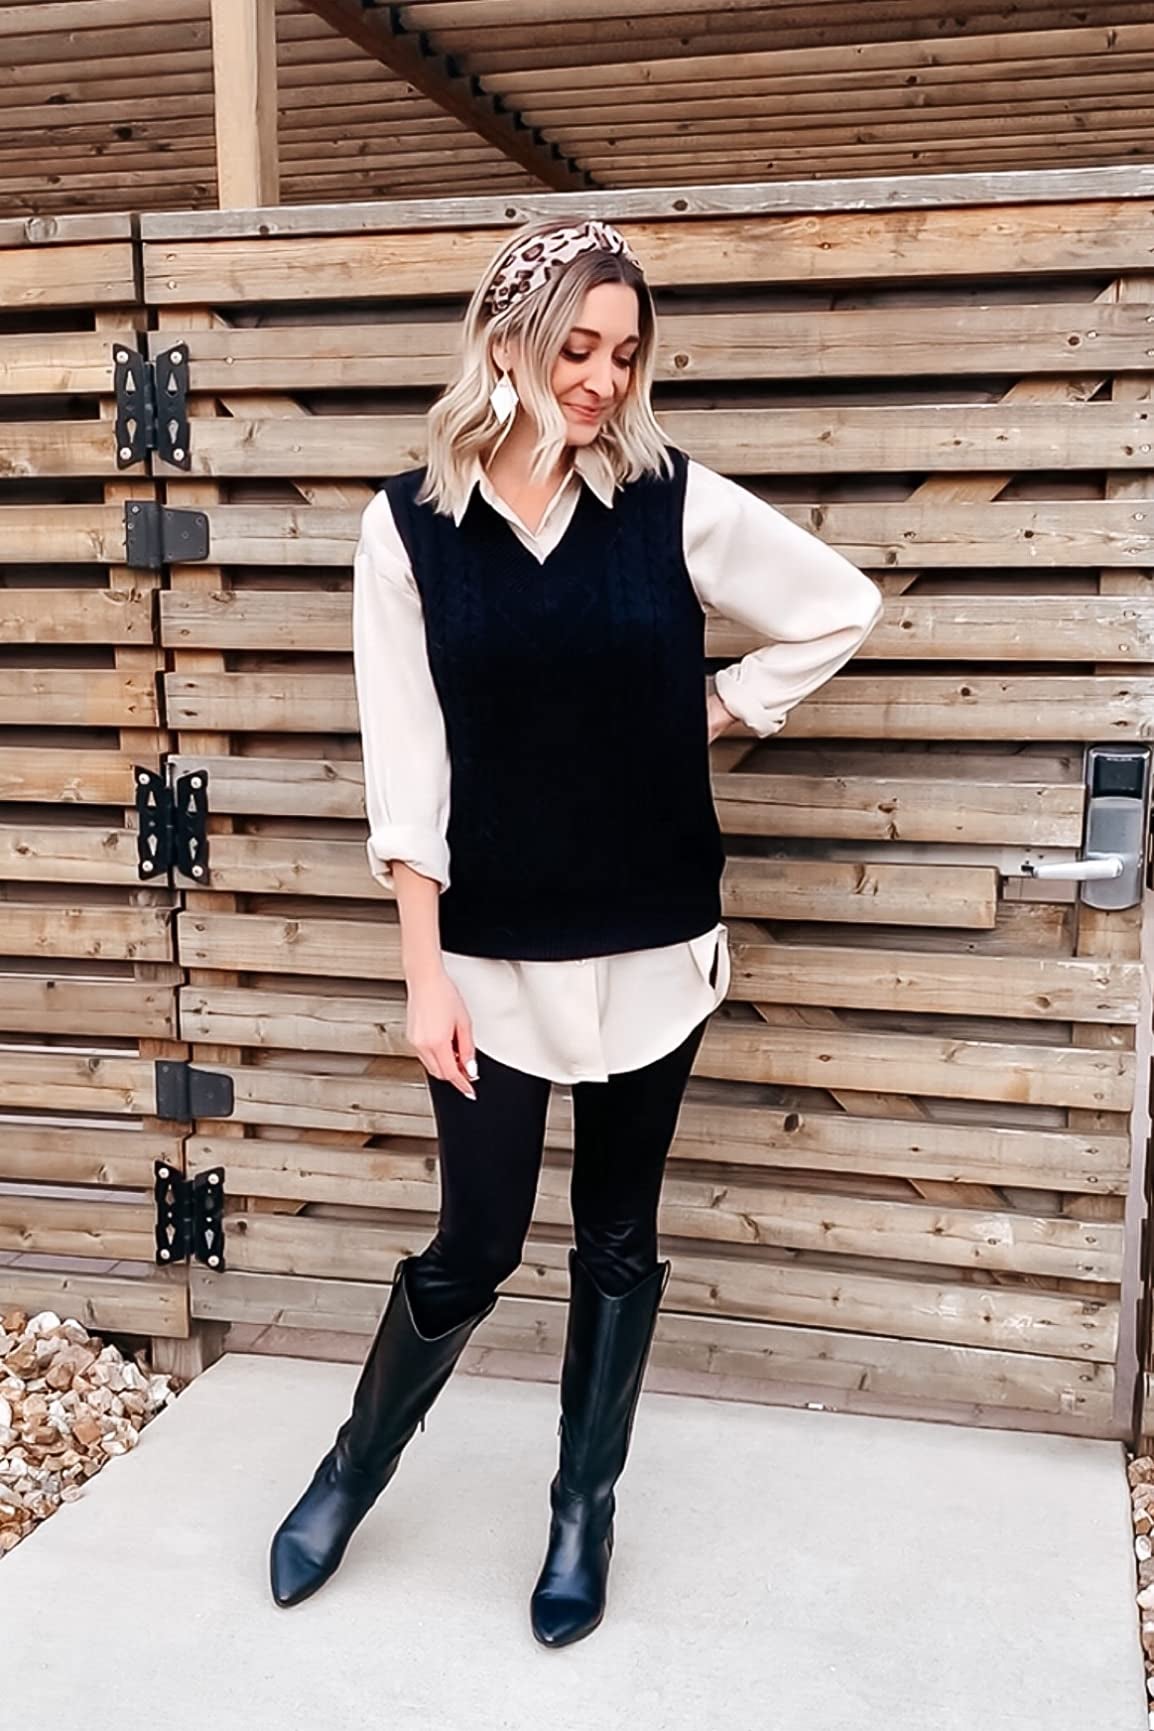 37 Fancy Work Outfits Ideas With Black Leggings To Copy Right Now  Outfits  with leggings, Fashionable work outfit, Womens fashion for work